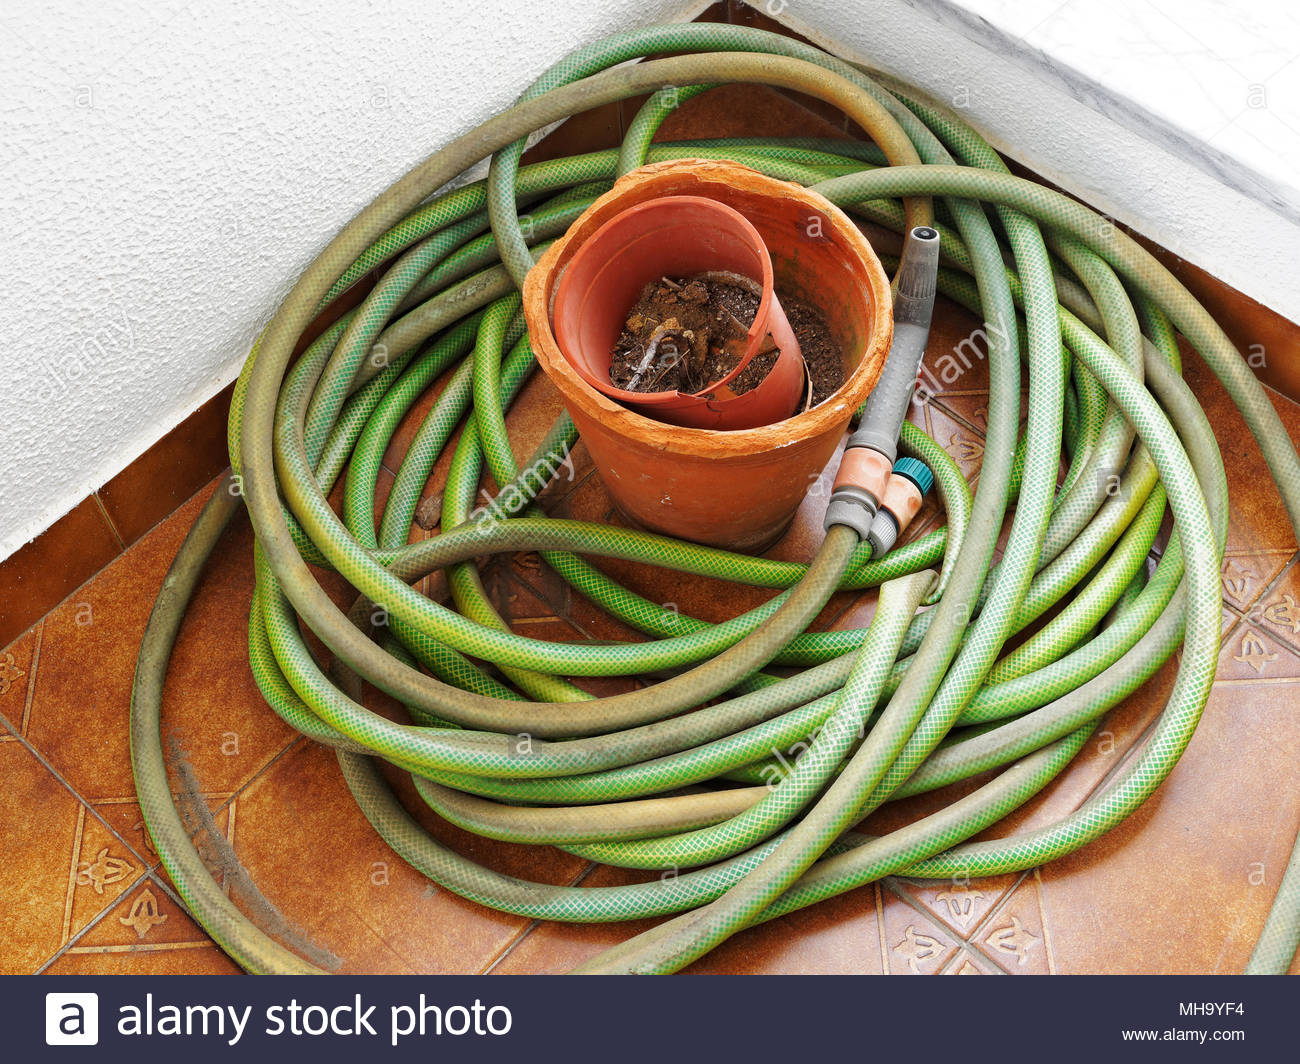 Old And Dirty Coiled Garden Hose With Worn Fittings And Broken